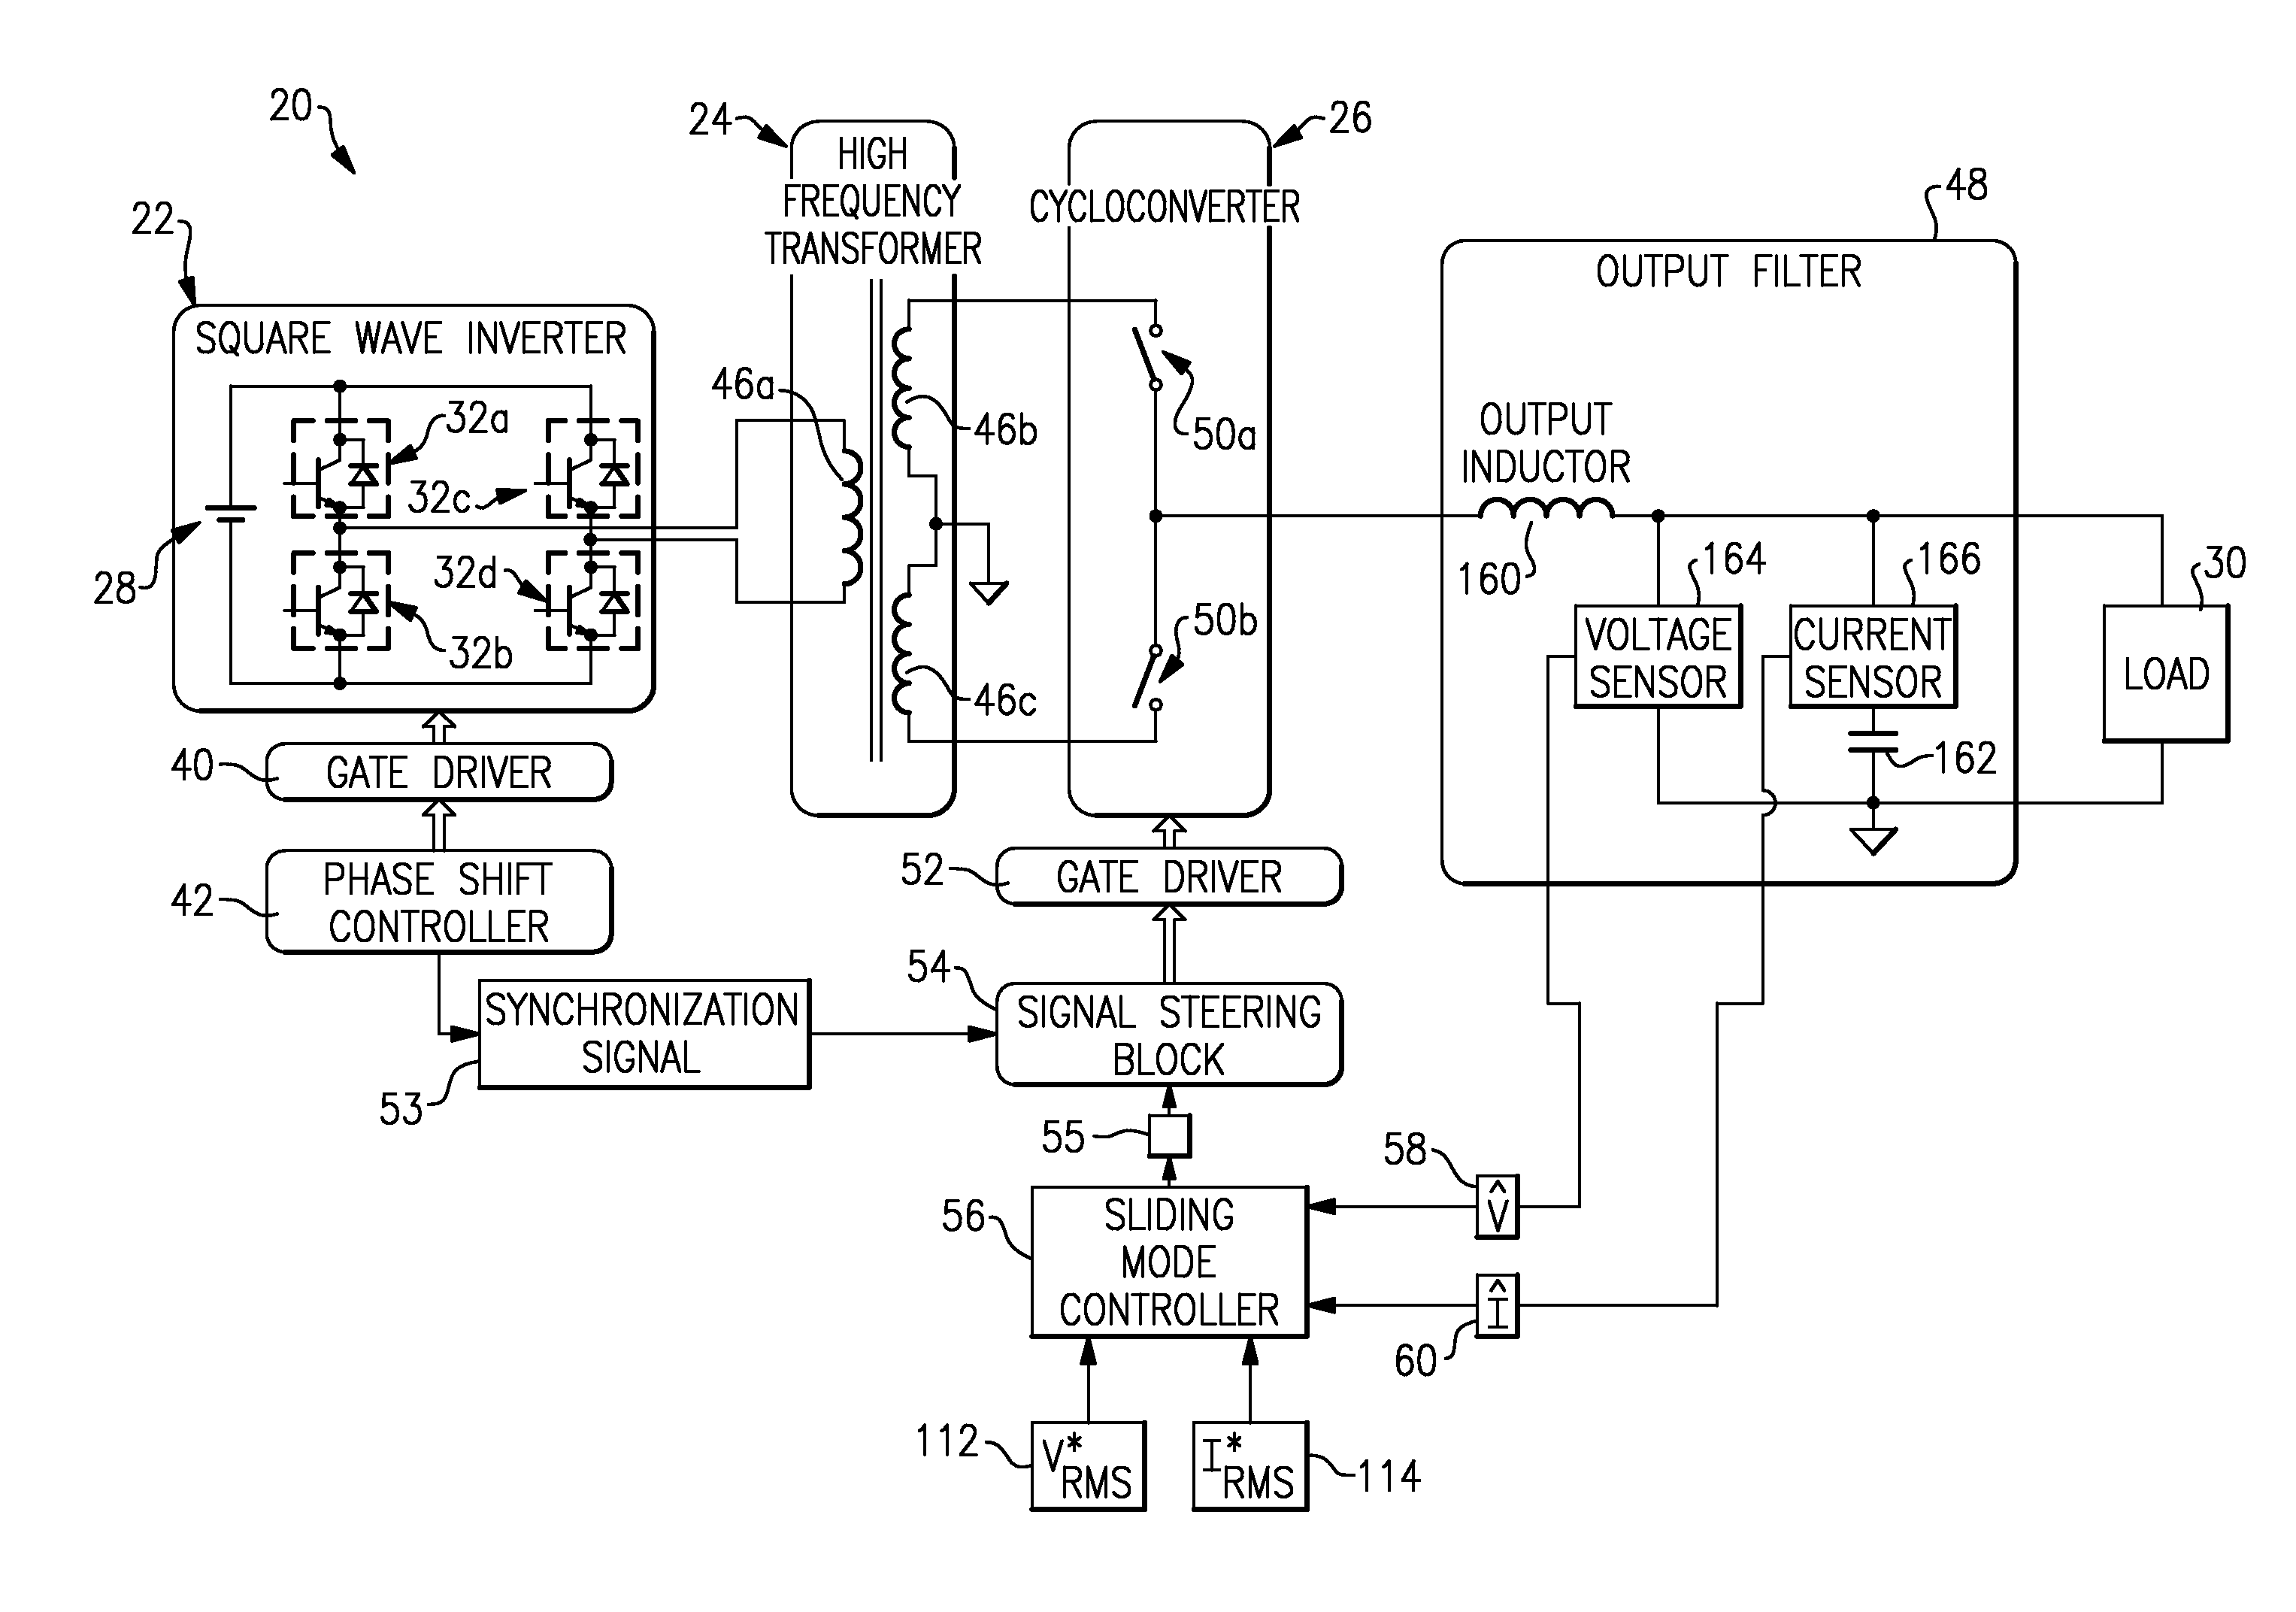 Power-conversion control system including sliding mode controller and cycloconverter